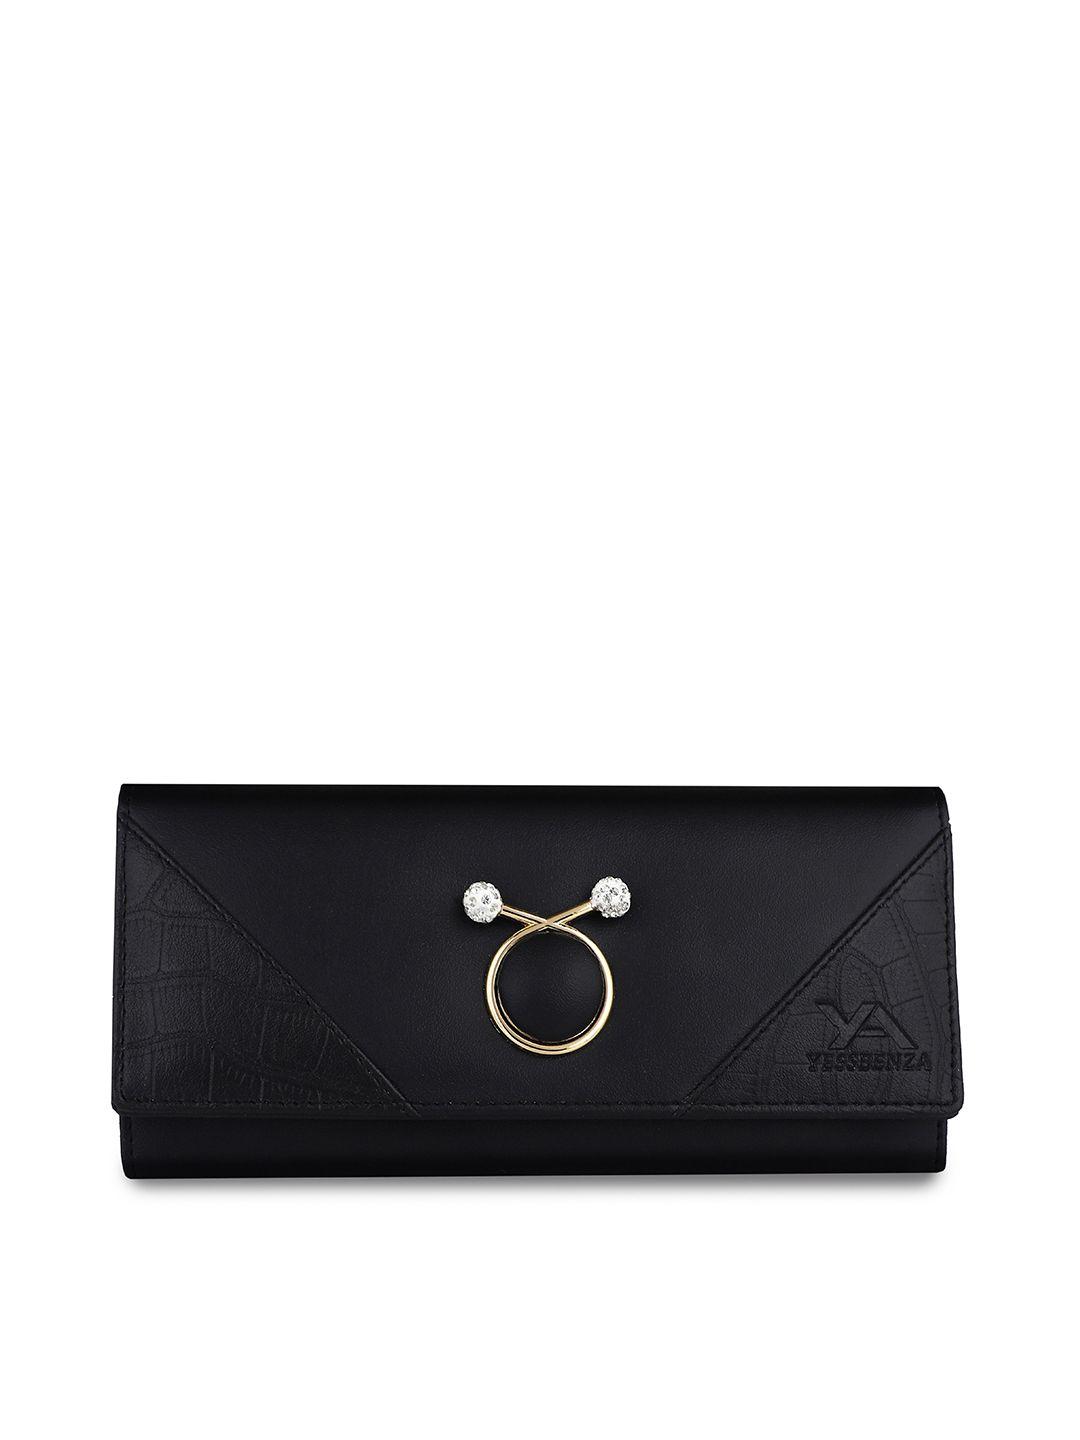 yessbenza women bow detail two fold wallet